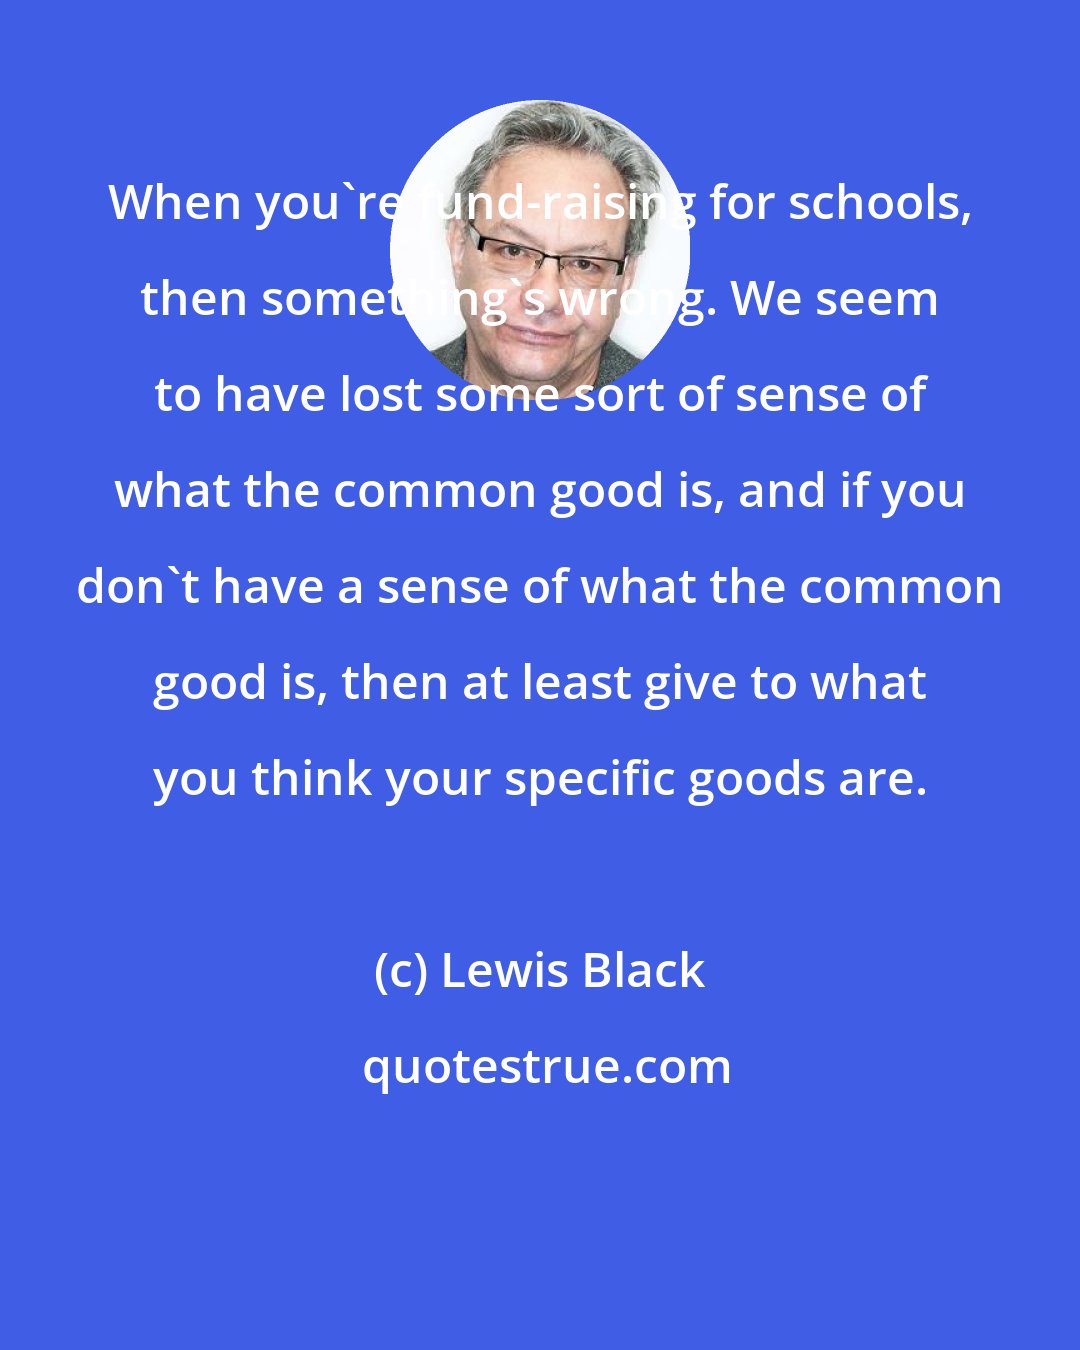 Lewis Black: When you're fund-raising for schools, then something's wrong. We seem to have lost some sort of sense of what the common good is, and if you don't have a sense of what the common good is, then at least give to what you think your specific goods are.